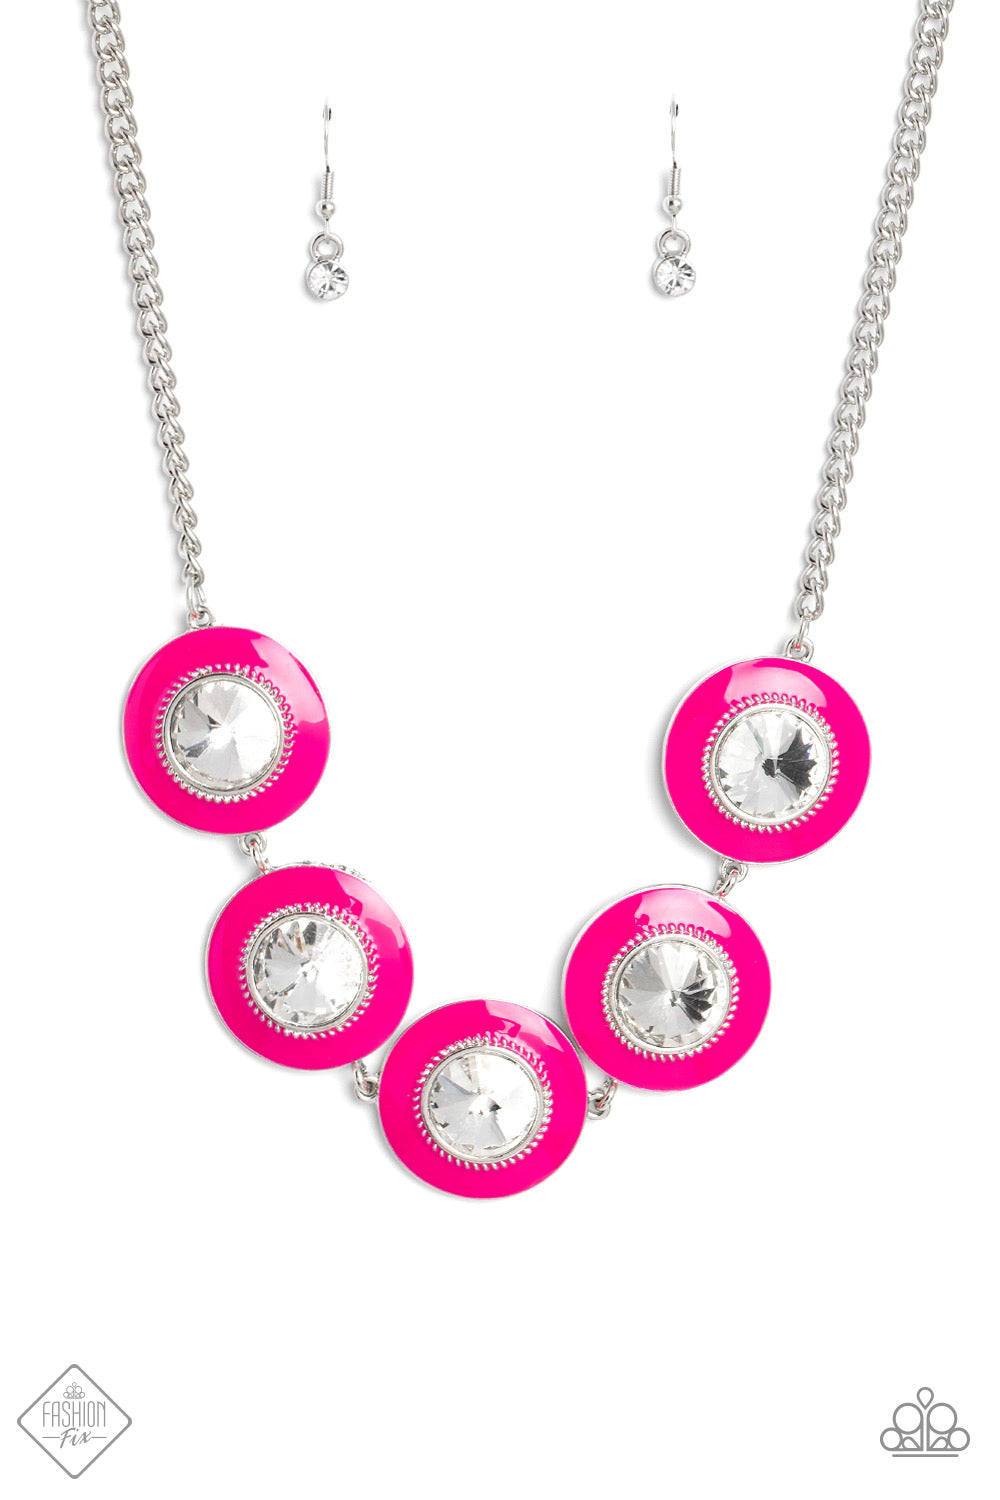 Jewelry Sets for Women : Paparazzi Pink Necklace & Paparazzi Pink Earrings Paparazzi jewelry image